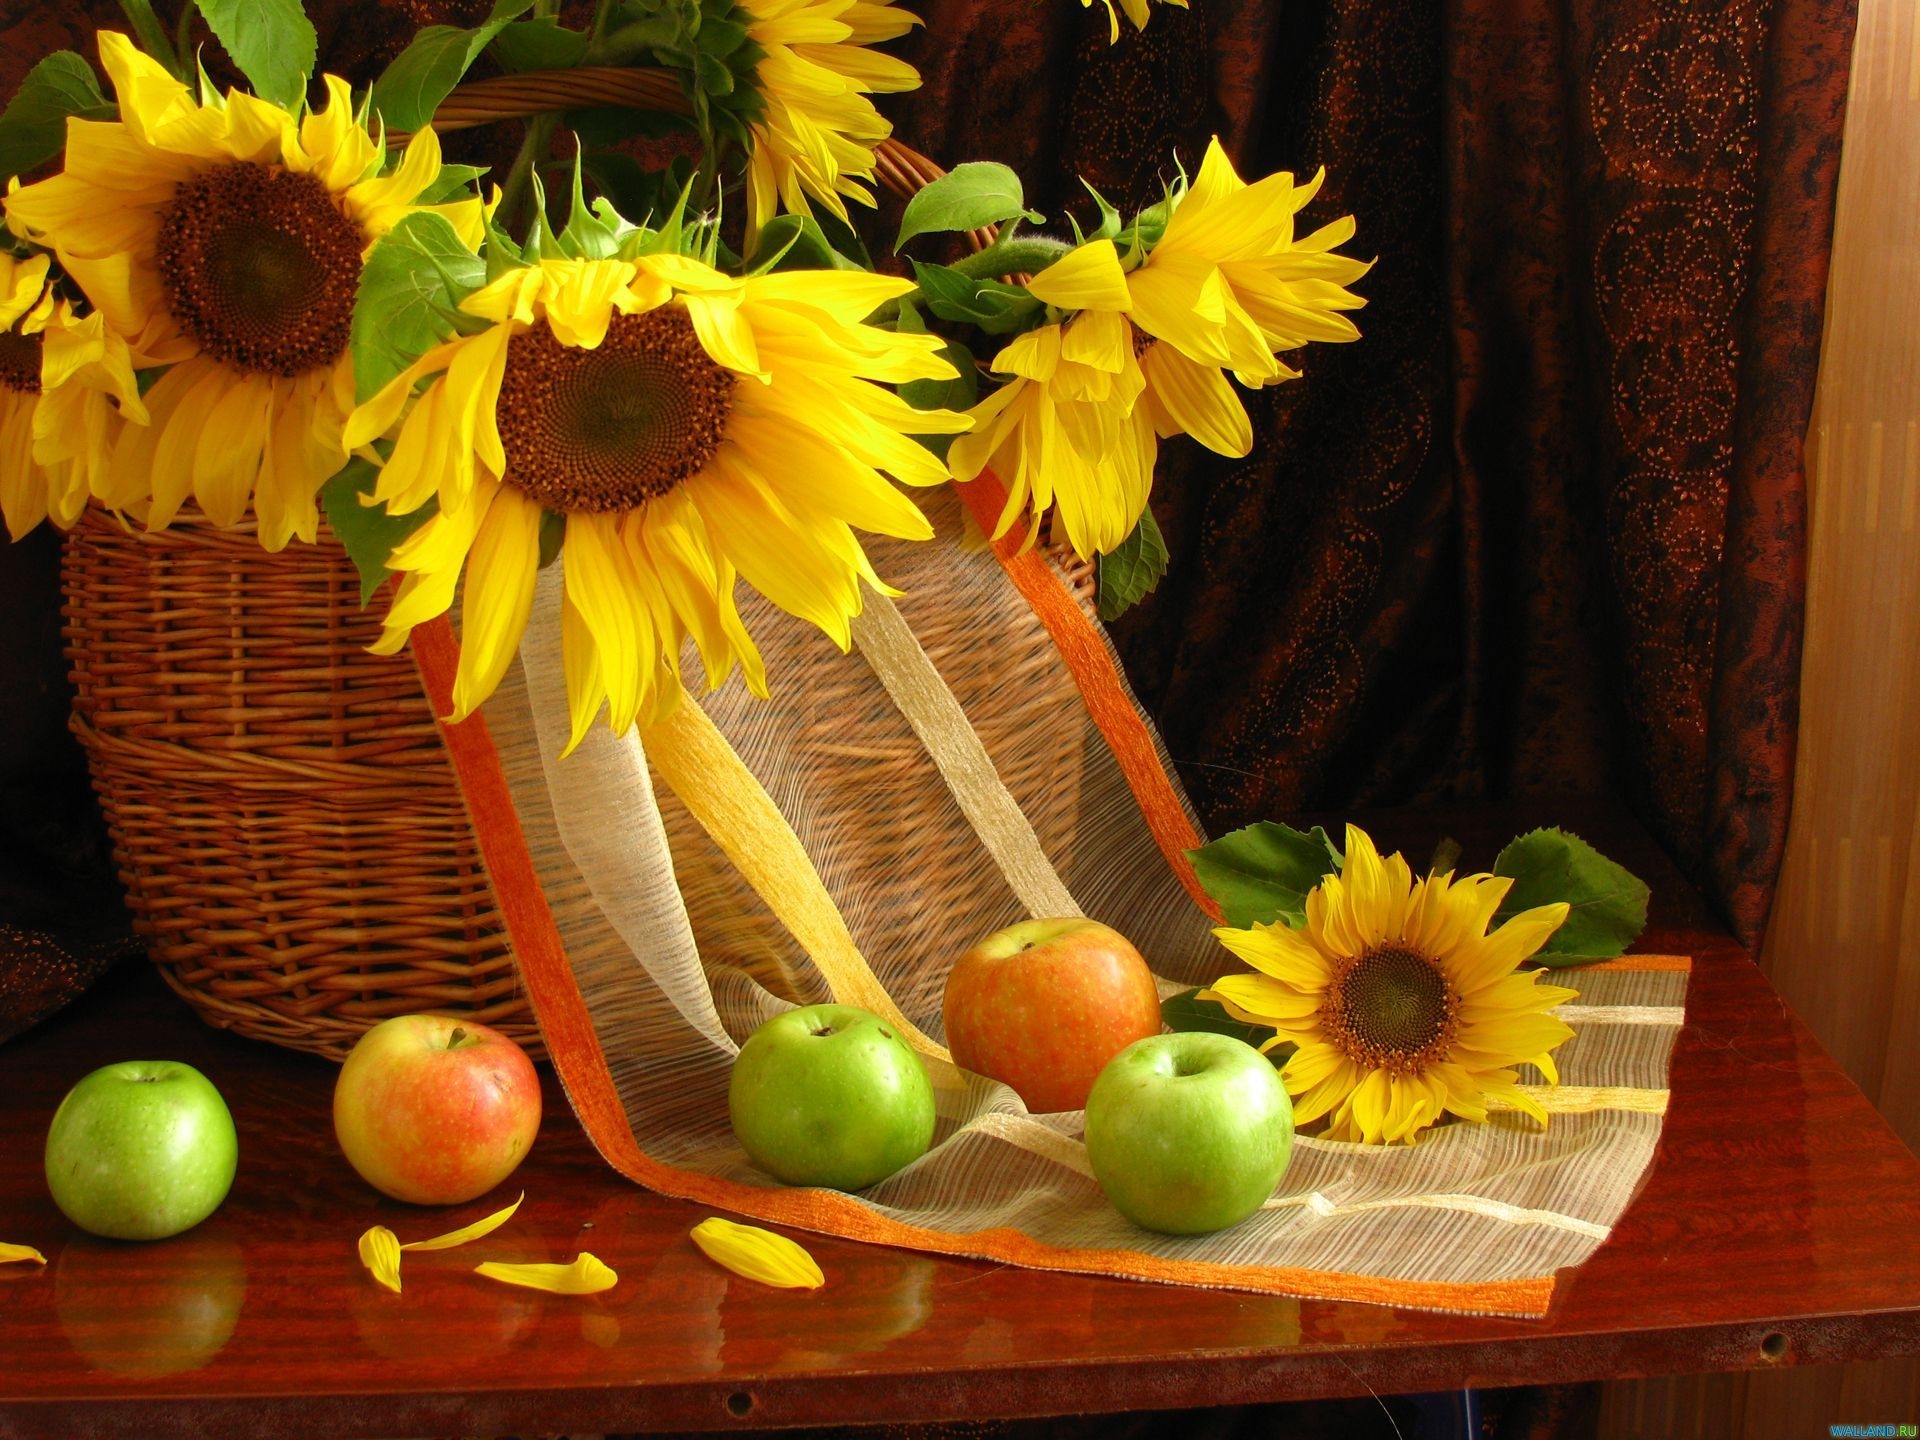 sunflowers, flowers, leaves, apples, still life, table, basket, curtains wallpapers for tablet